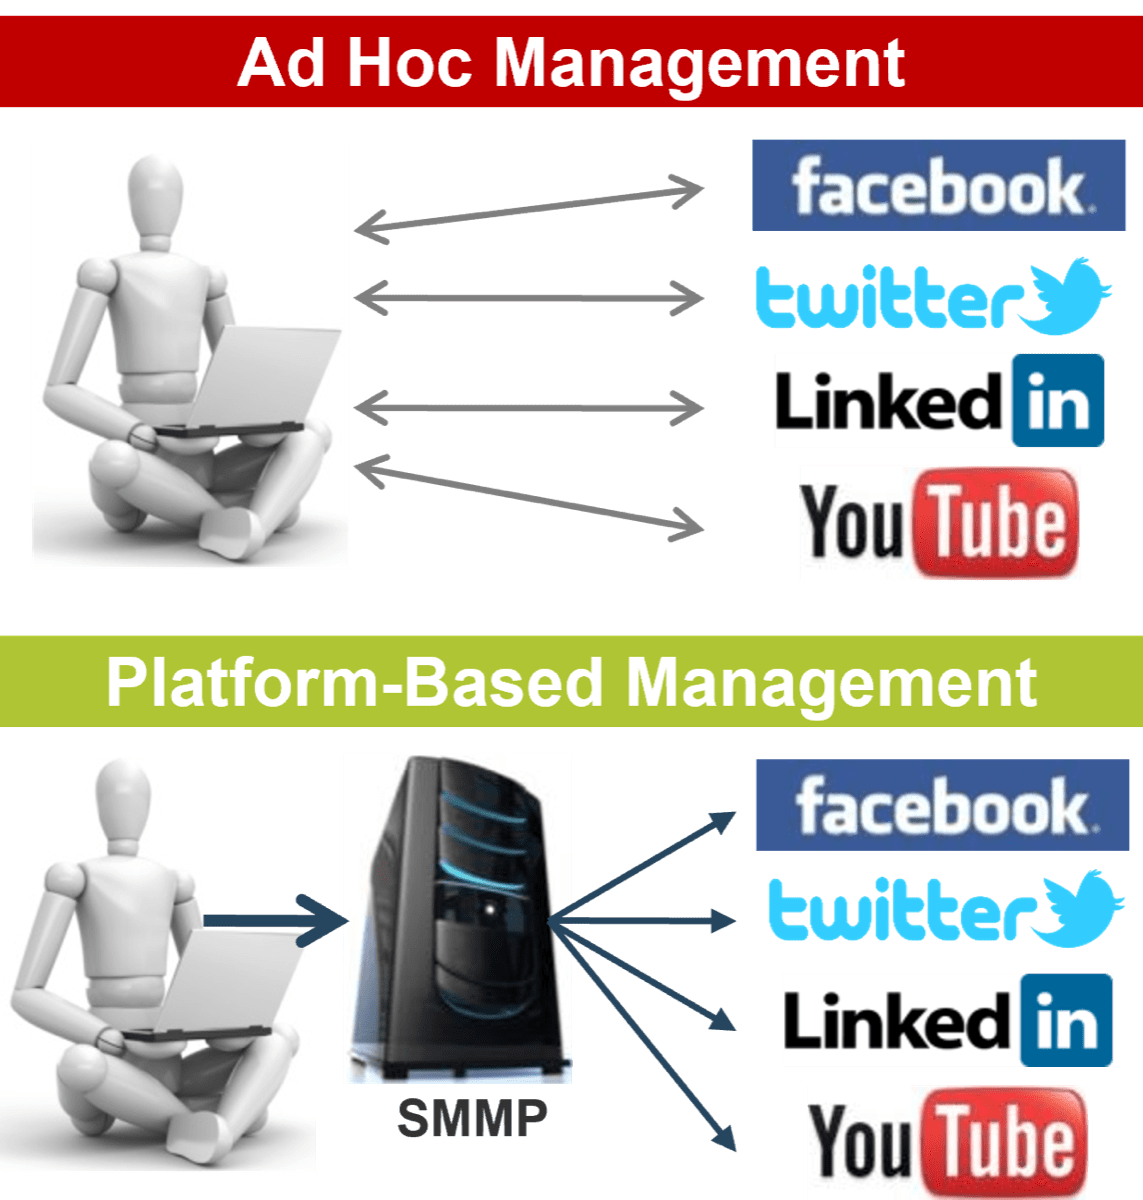 Comparison of 'Ad Hoc Management' with each social media platform managed directly by the user and 'Platform-Based Management' with social platforms managed by a 'SMMP' which is managed by the user.